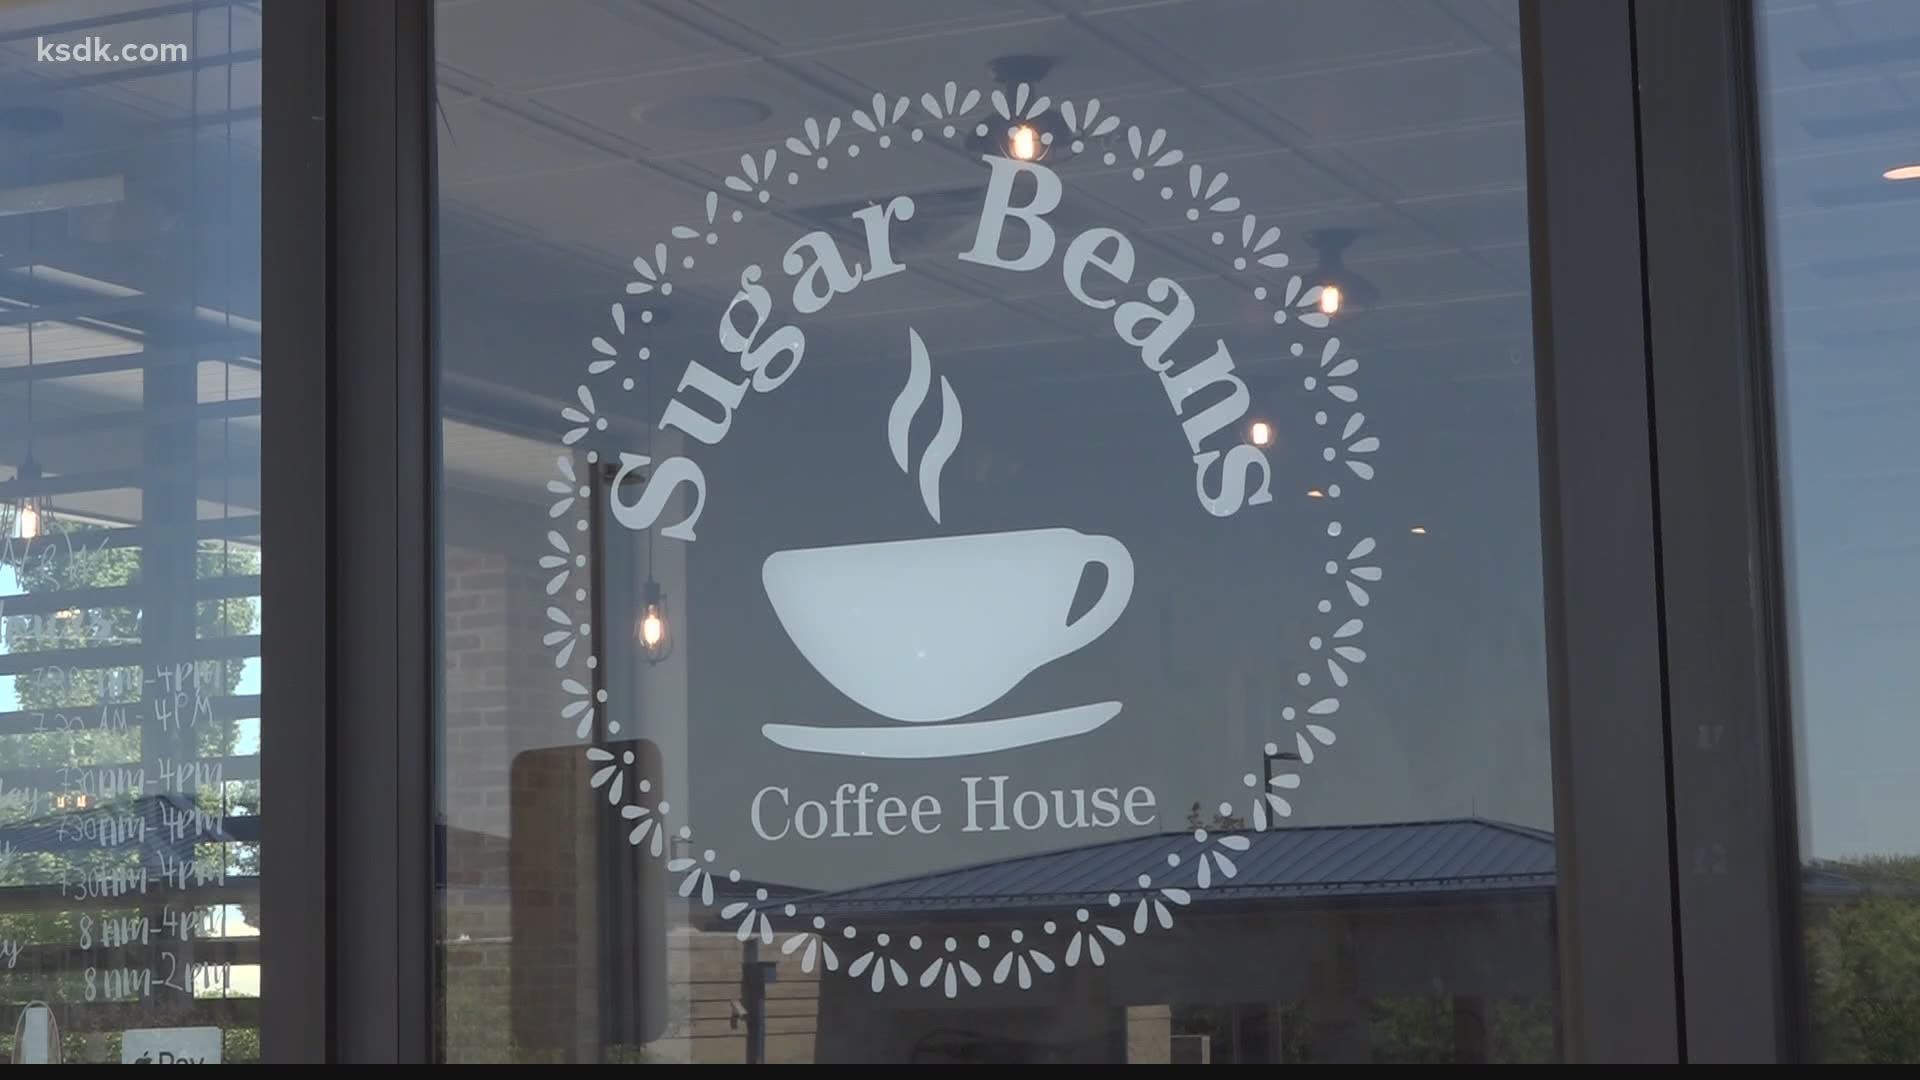 Sugar Beans Coffee House is a community-based coffee house that uses locally sourced products.